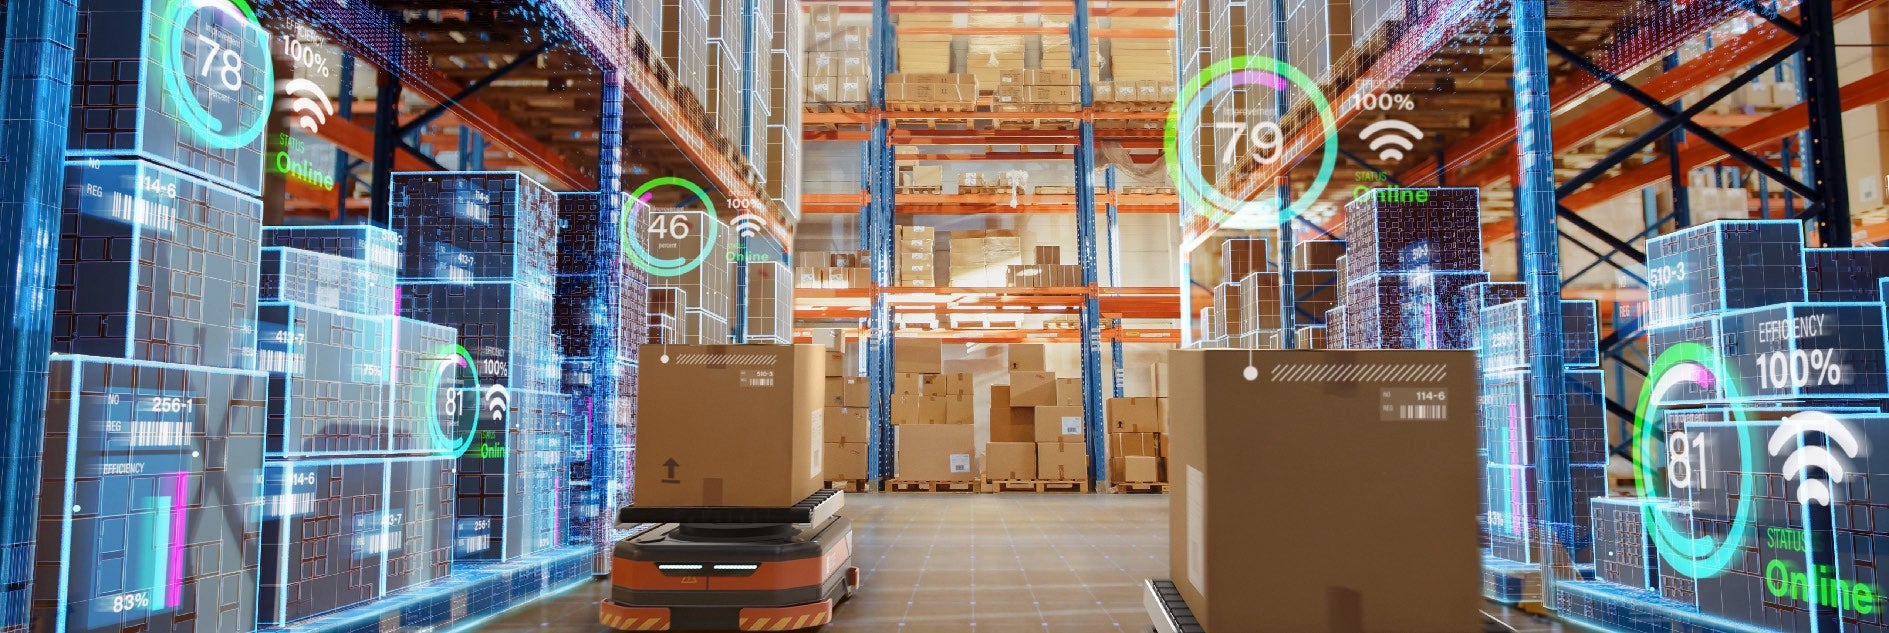 robots being controlled by software in a warehouse